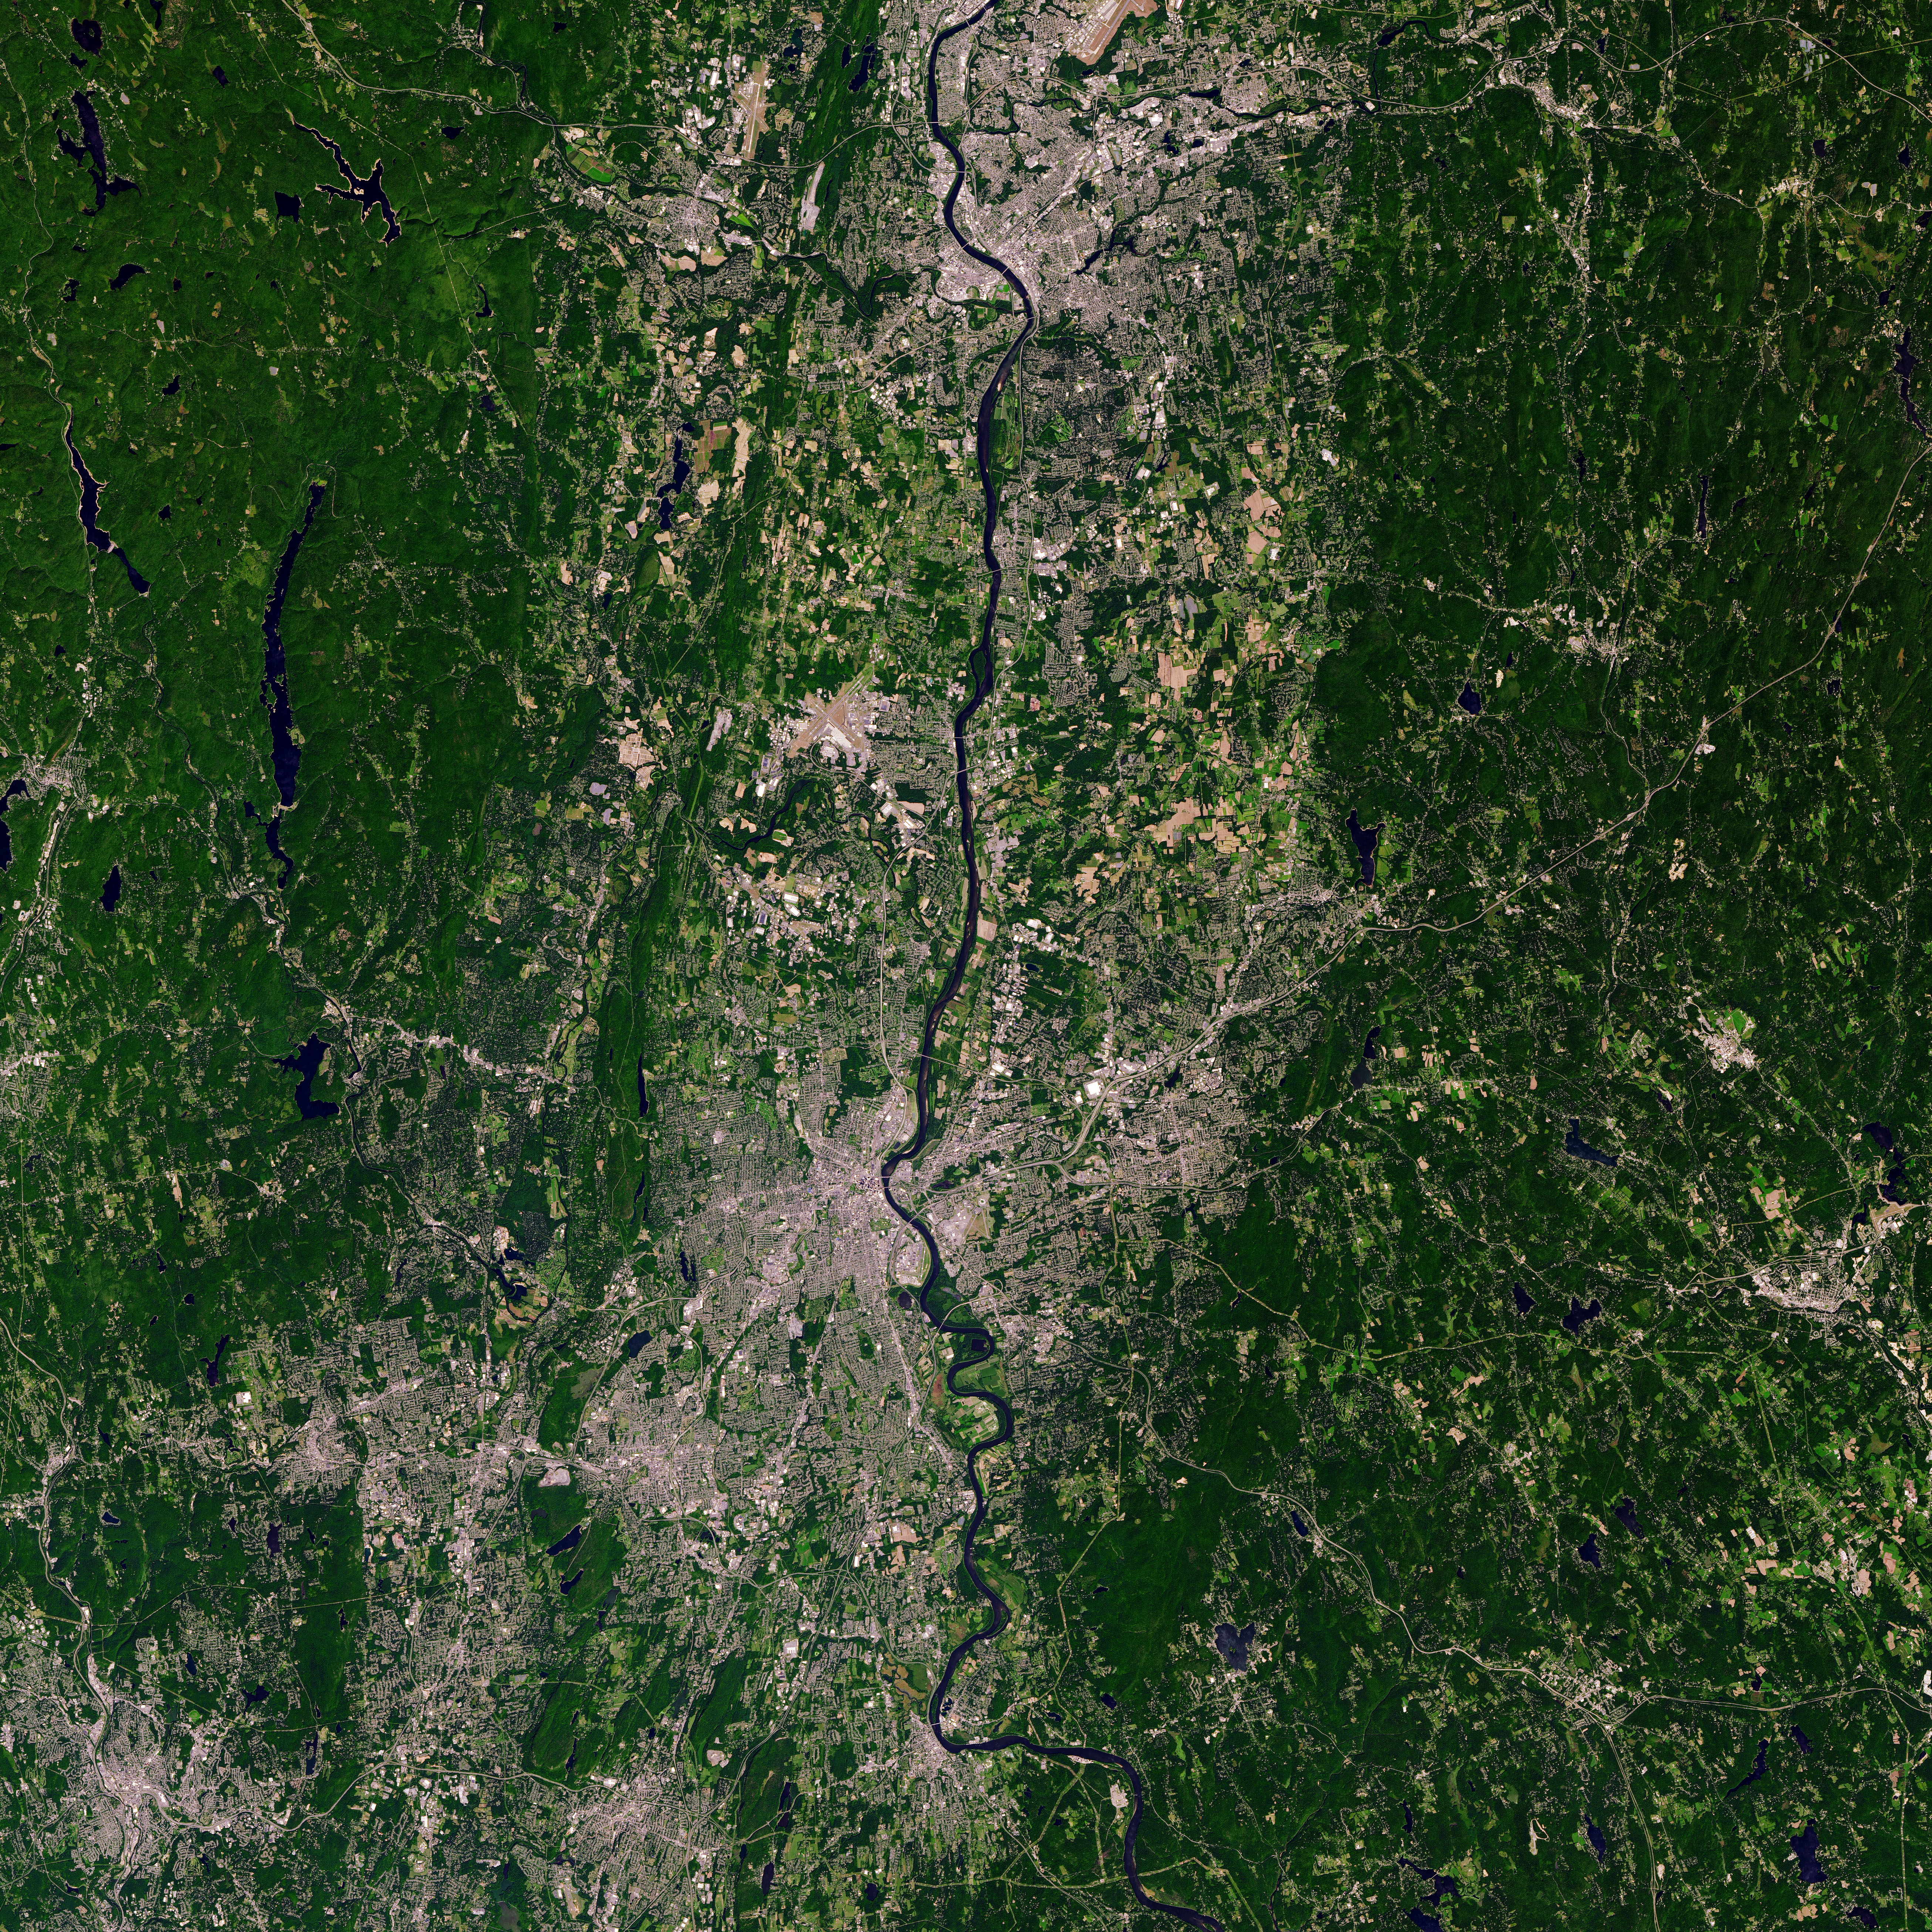 A view of Simsbury, Connecticut from the Landsat 9 satellite. The edges of the image are green, while the center has patches of brown along a water source.